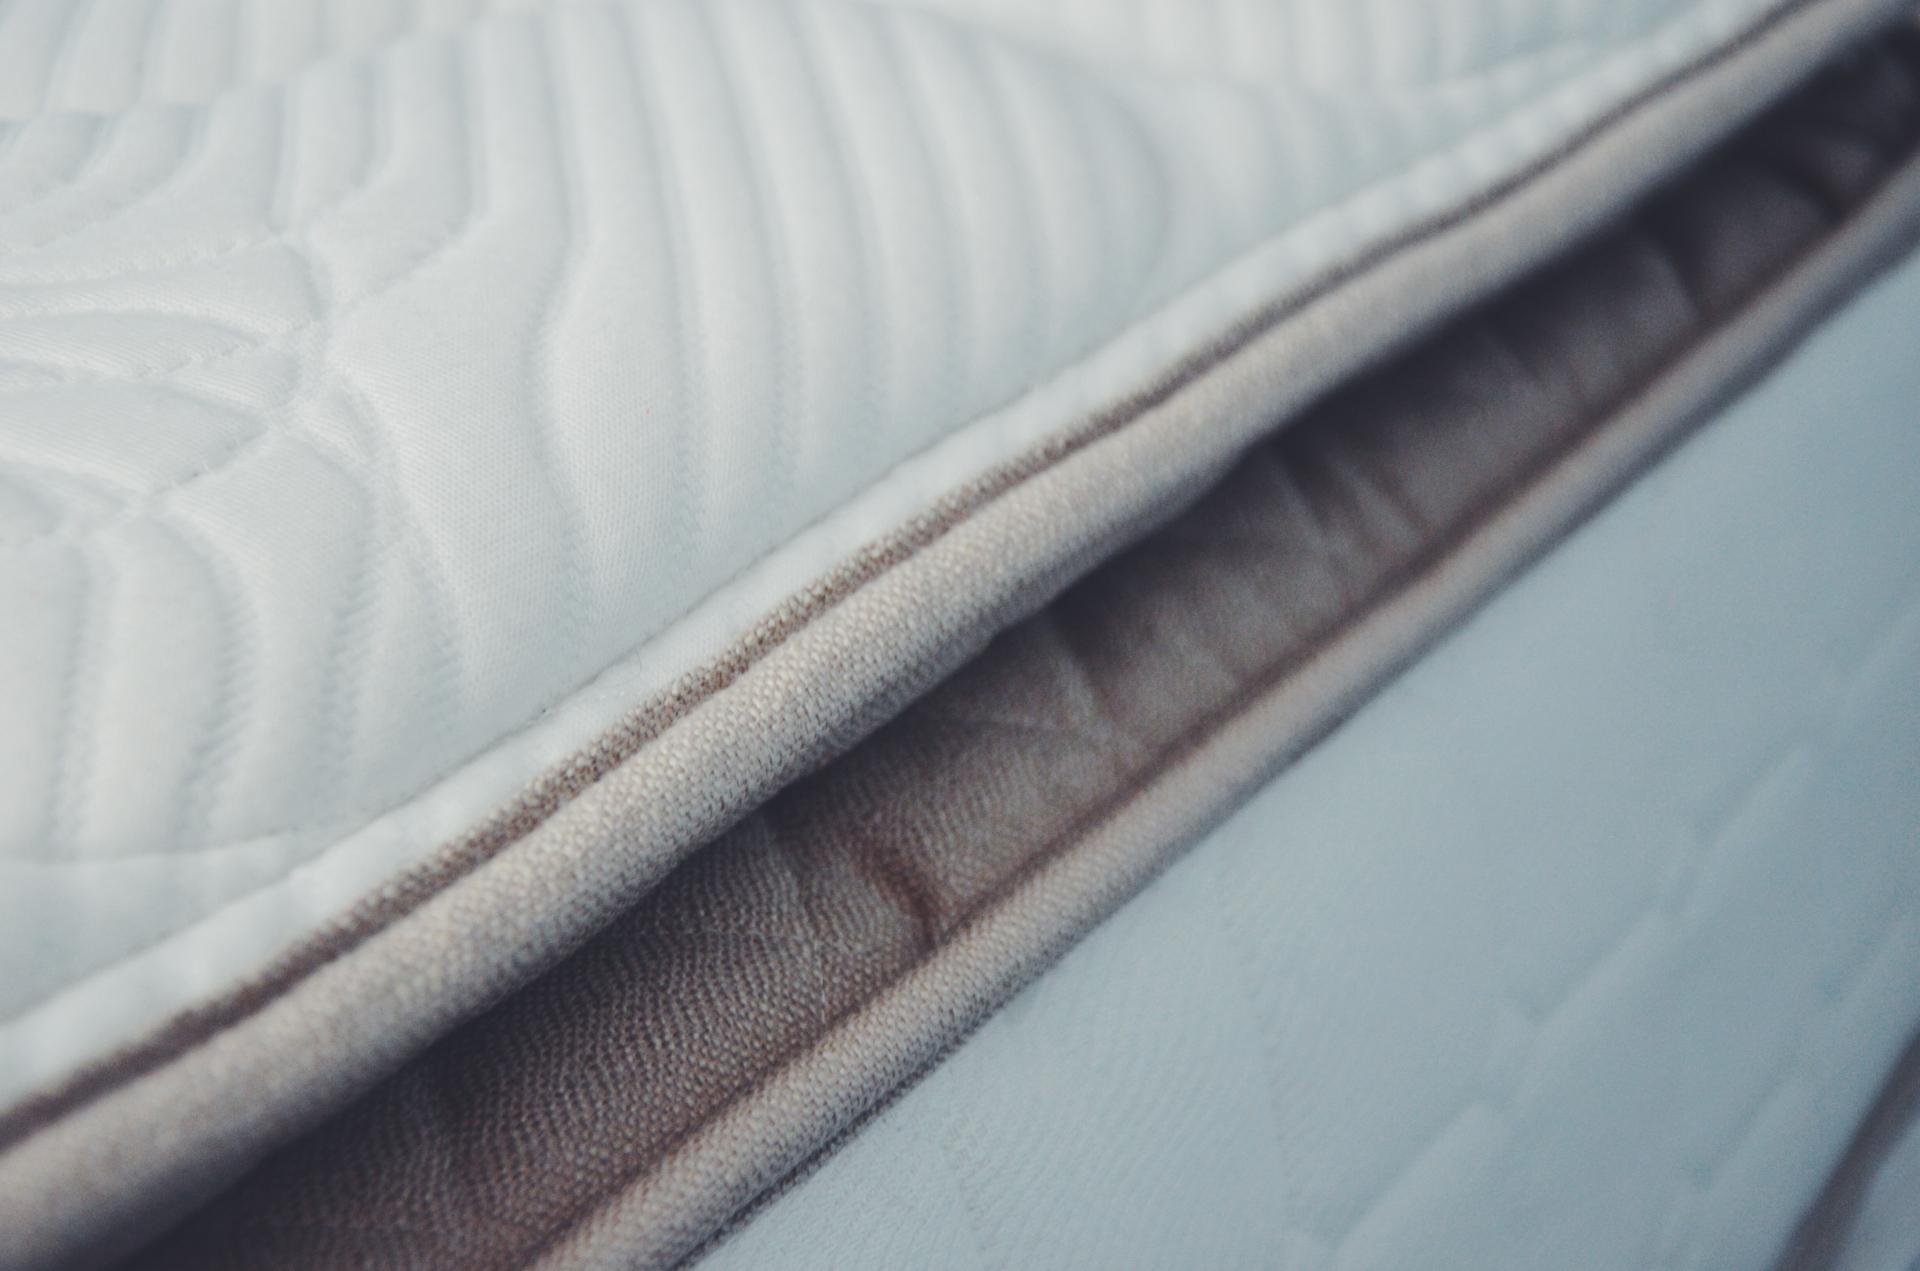 Review of Sealy Mattress